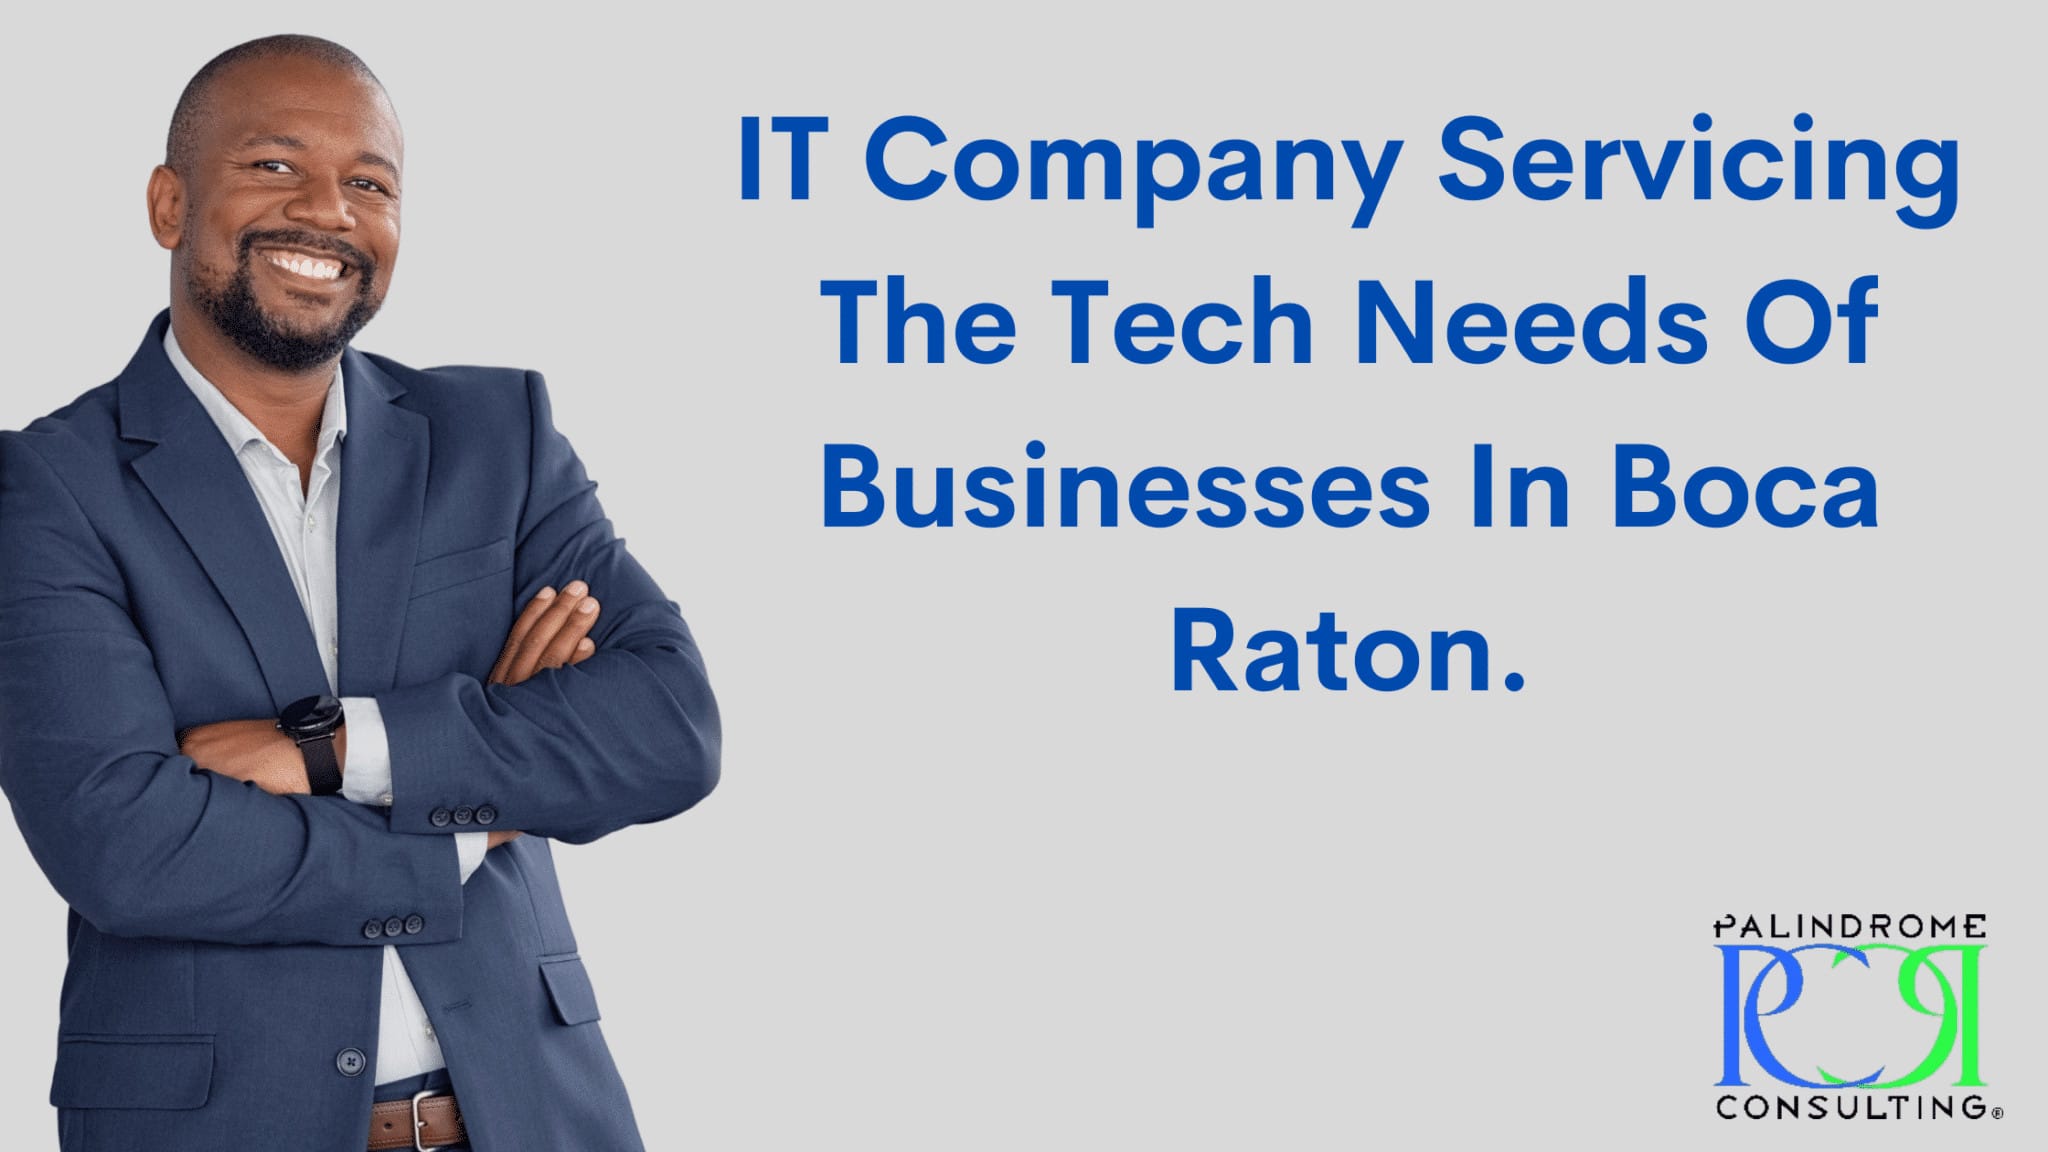 IT Company Servicing The Tech Needs Of Businesses In Boca Raton.